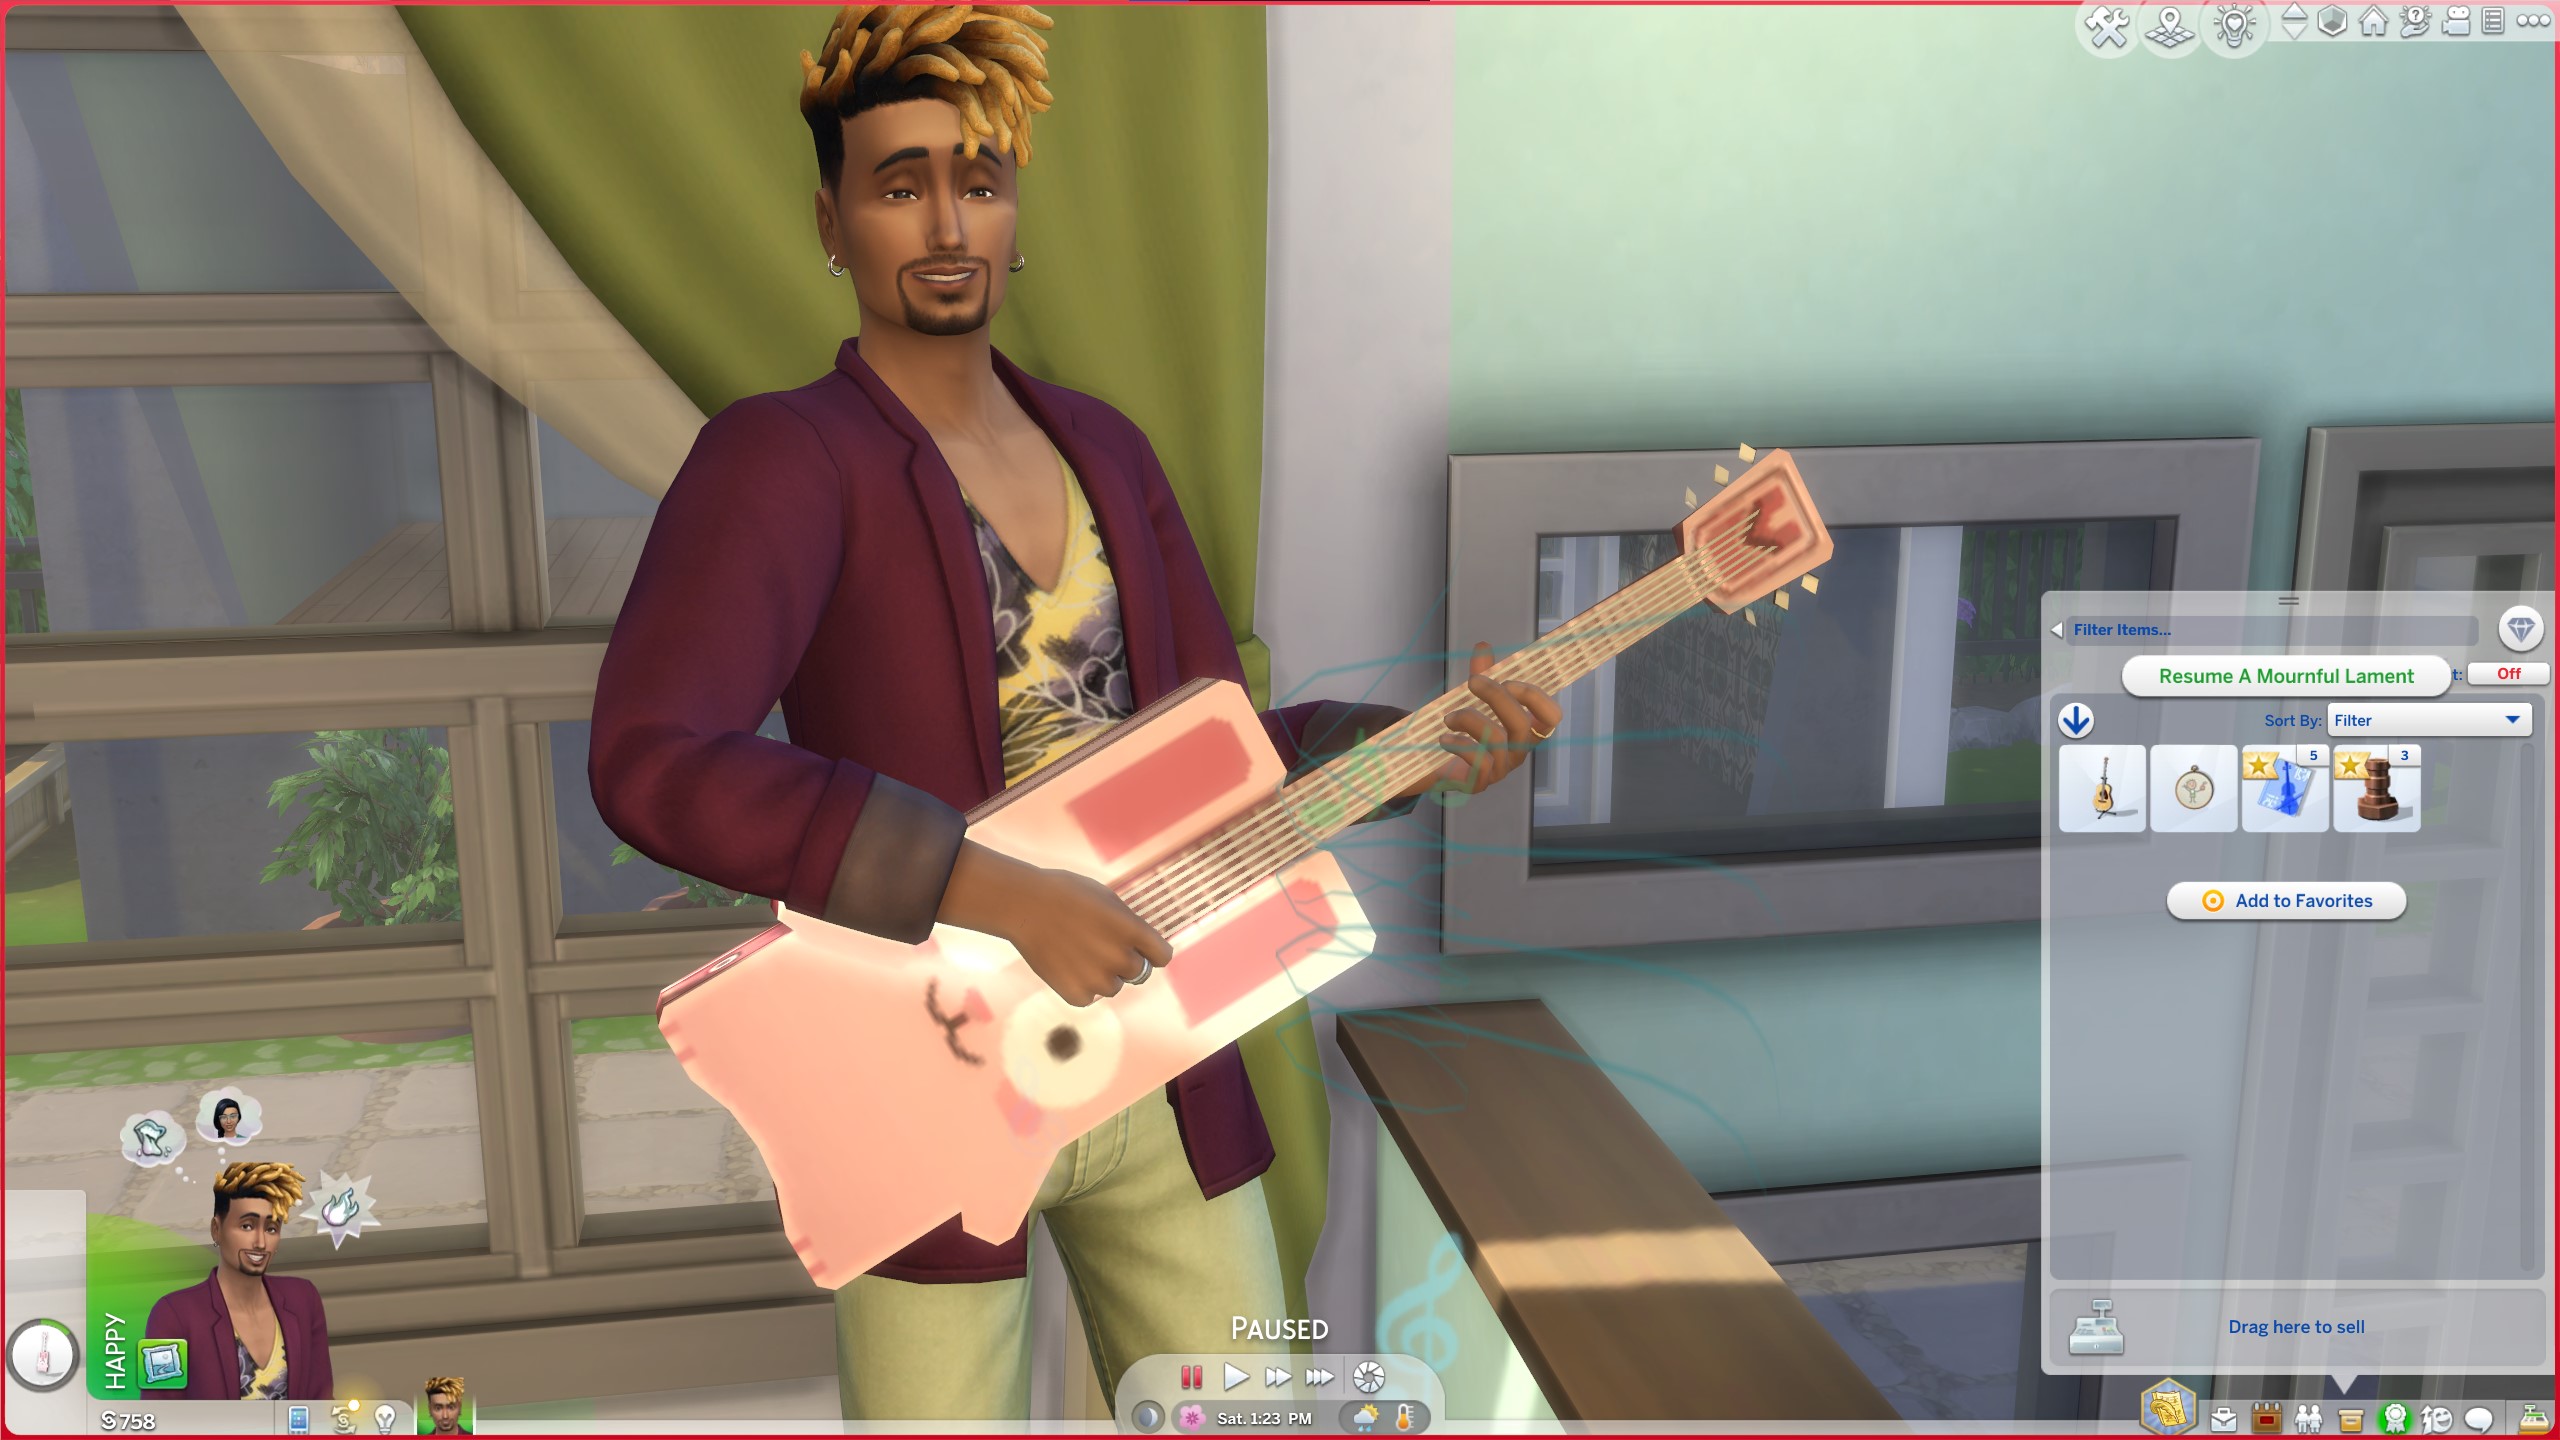 The Sims 4- A Sim plays the guitar happily while selecting 